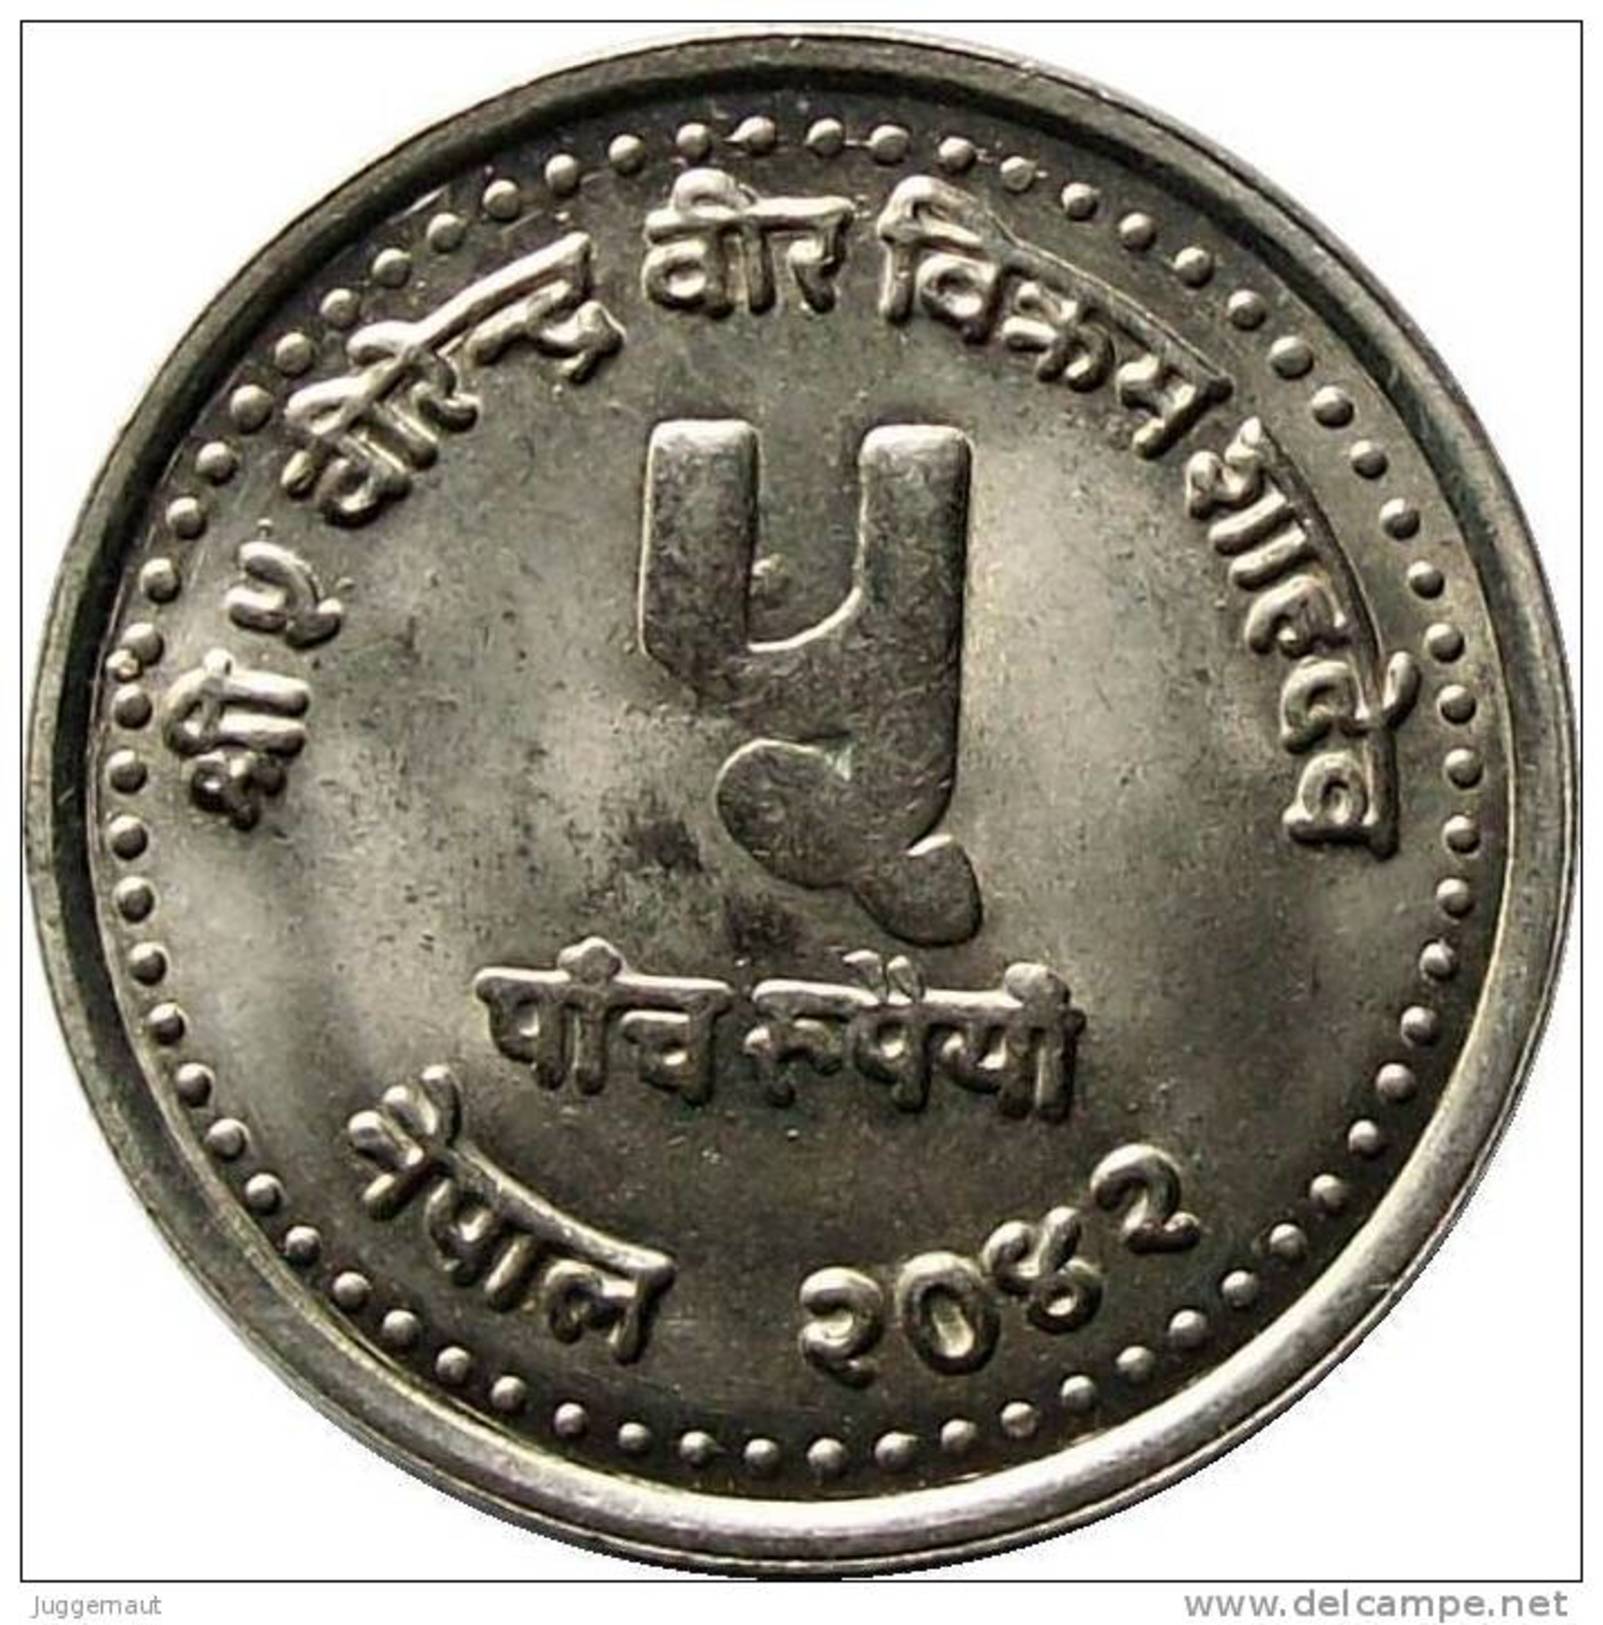 NEPAL SOCIAL SERVICES DAY 1985 COMMEMORATIVE COIN NEPAL 1985 KM-1047 UNCIRCULATED UNC - Népal